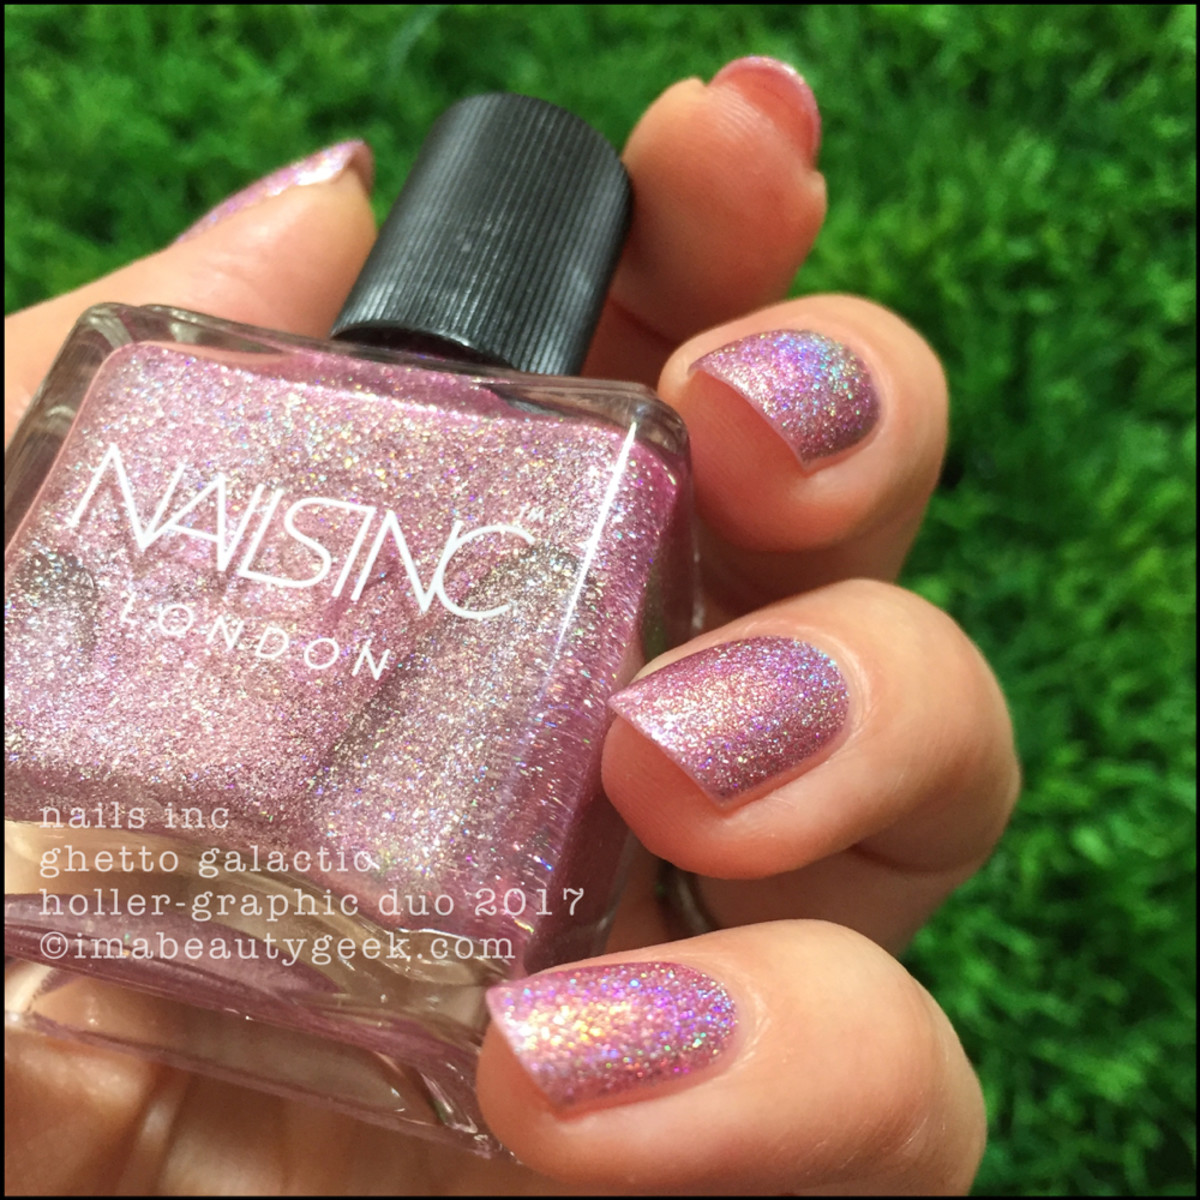 Nails Inc Ghetto Galactic Holler-Graphic Duo Swatches Review 2017 4